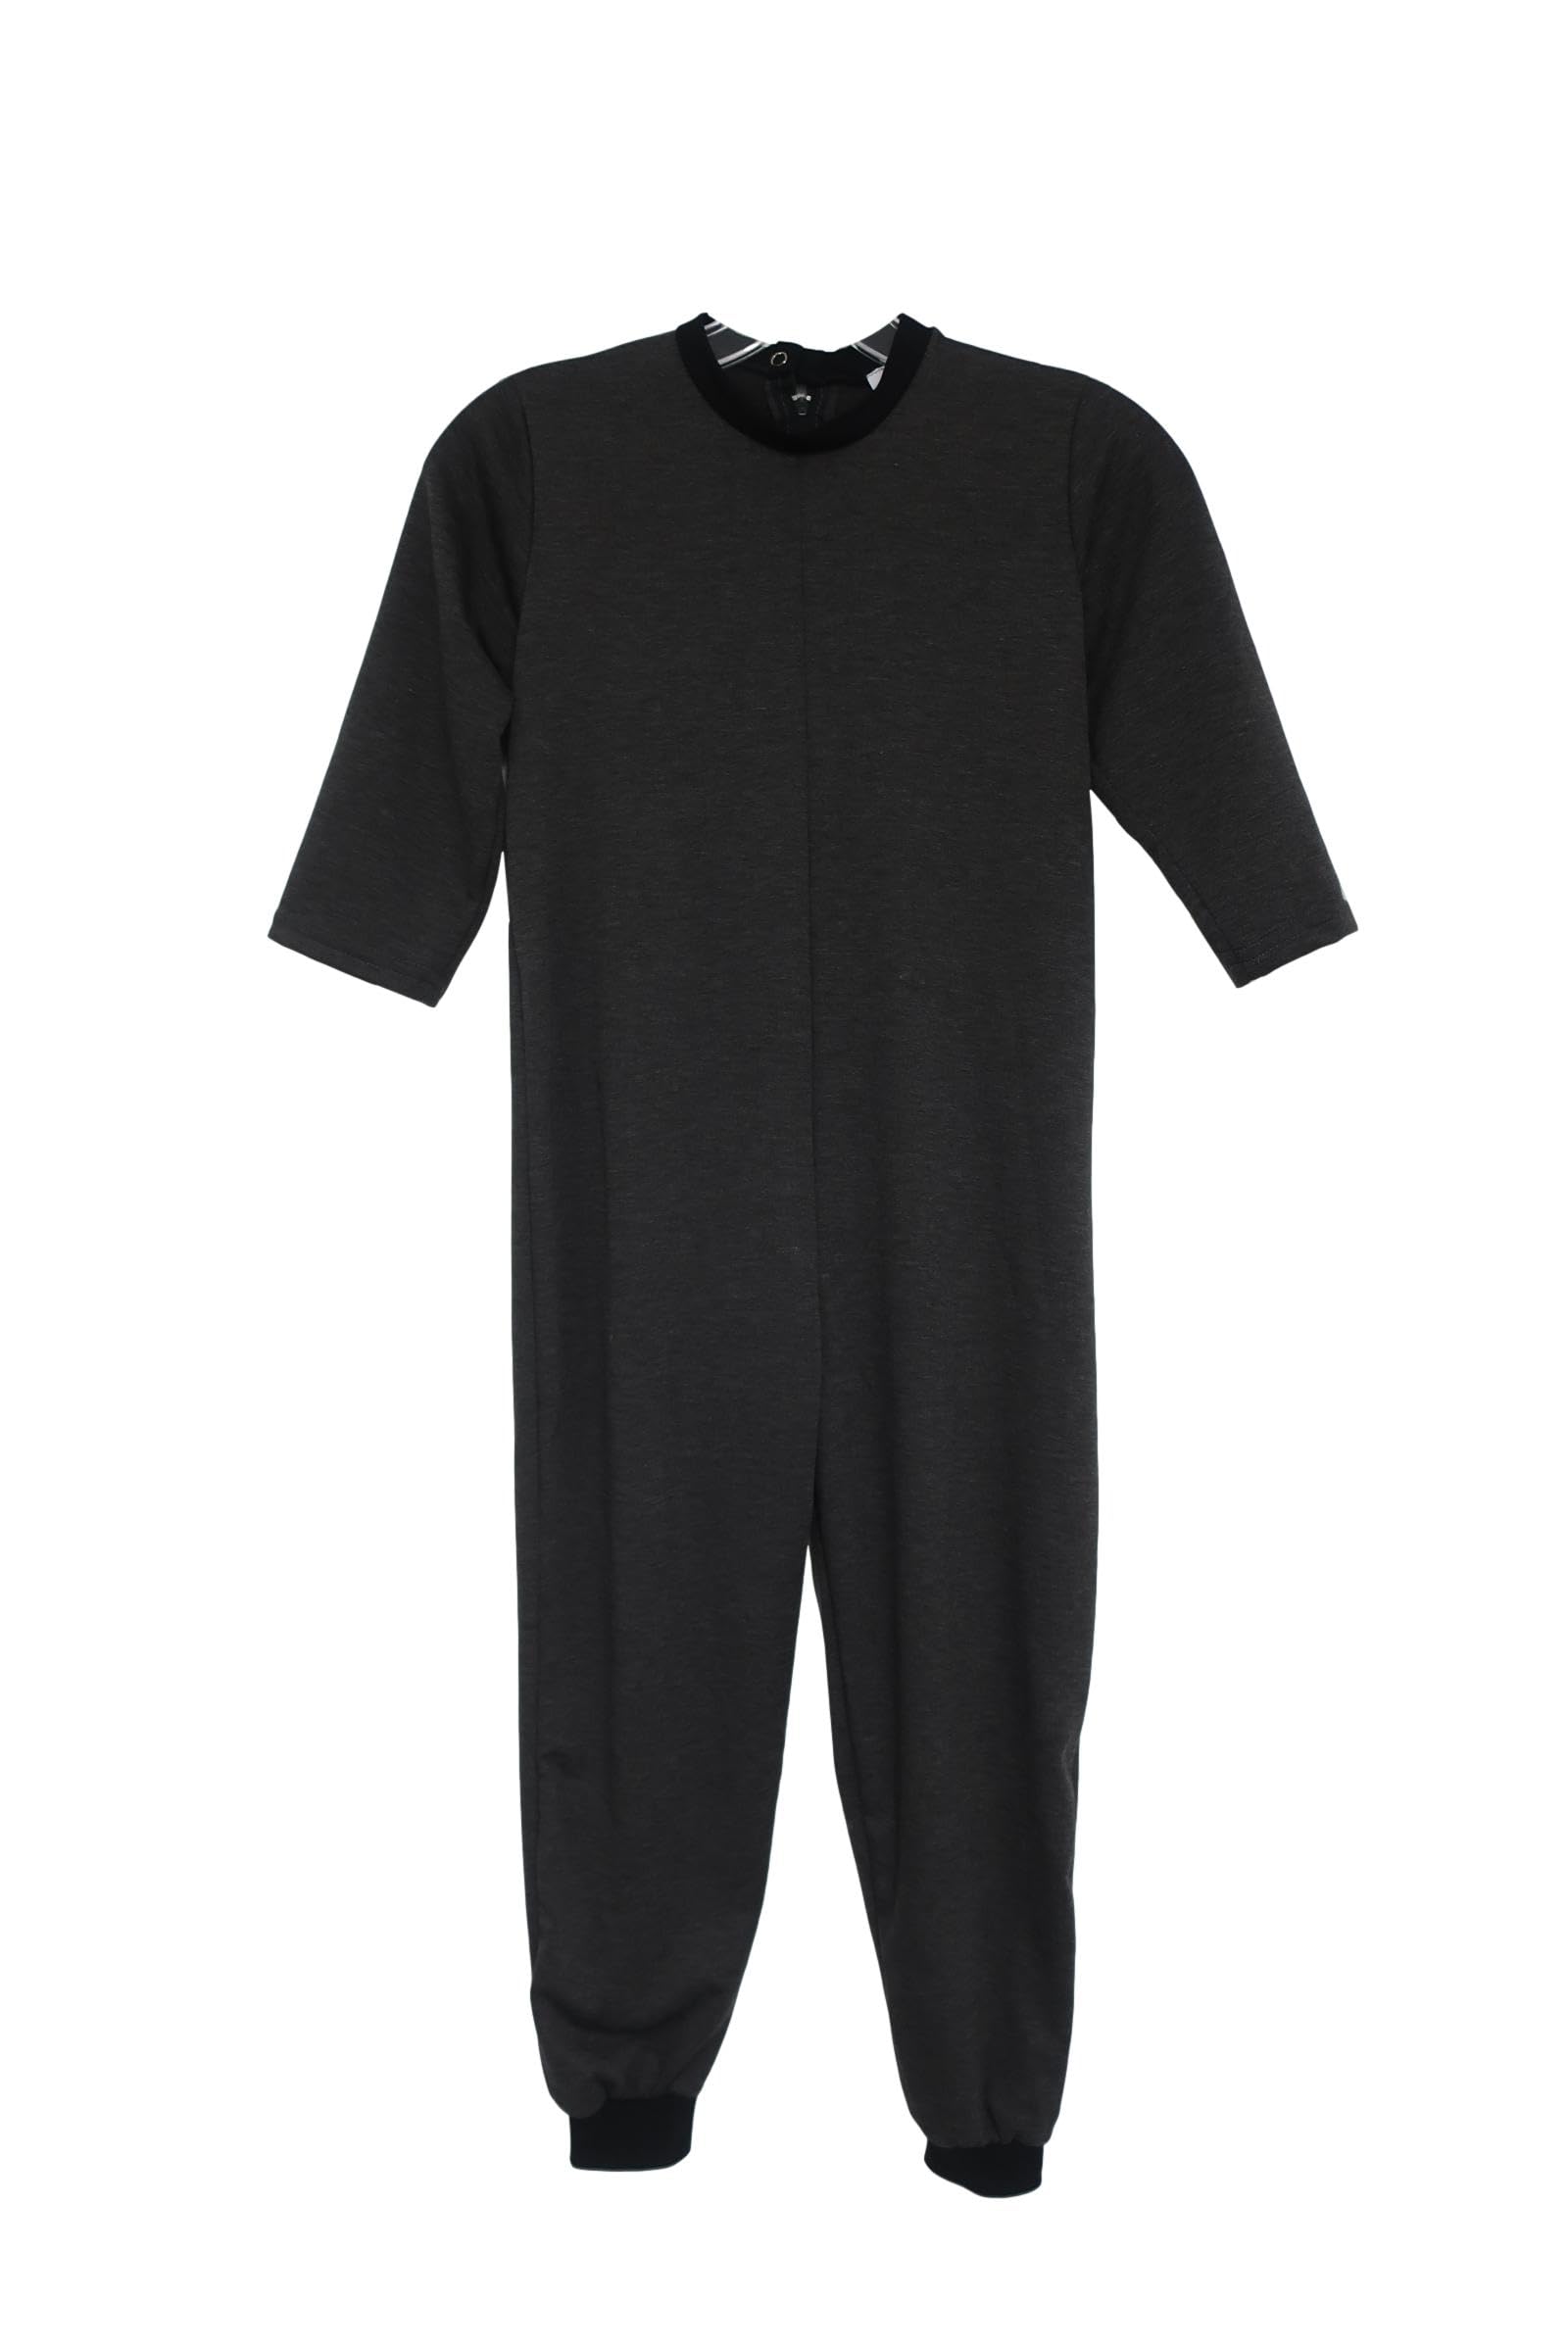 Benefit Wear One-Piece Anti-Strip Jumpsuit for Kids with Special Needs